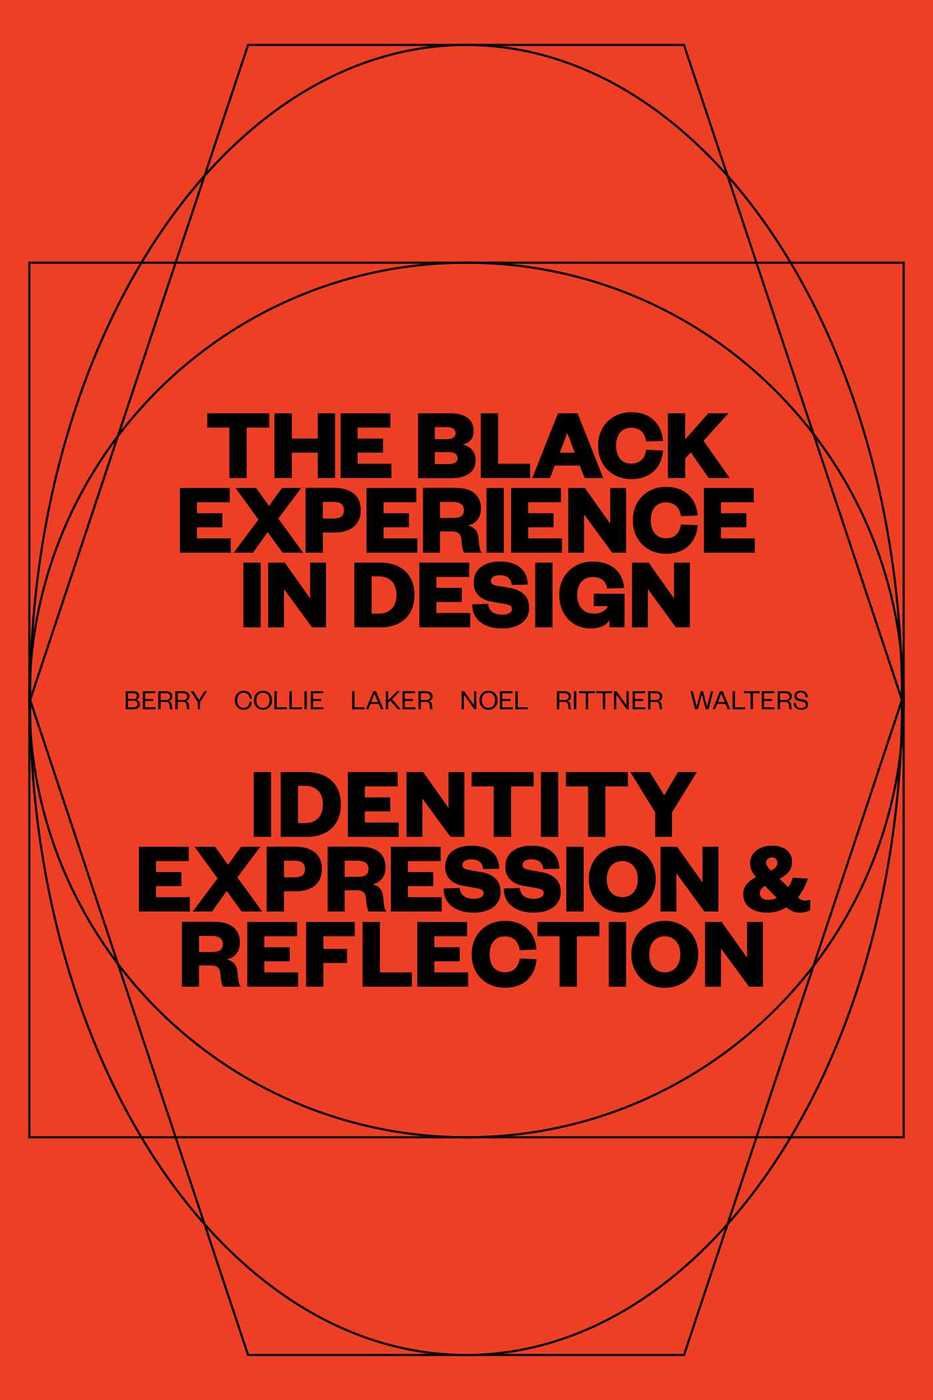 The black experience in design 9781621537854 hr